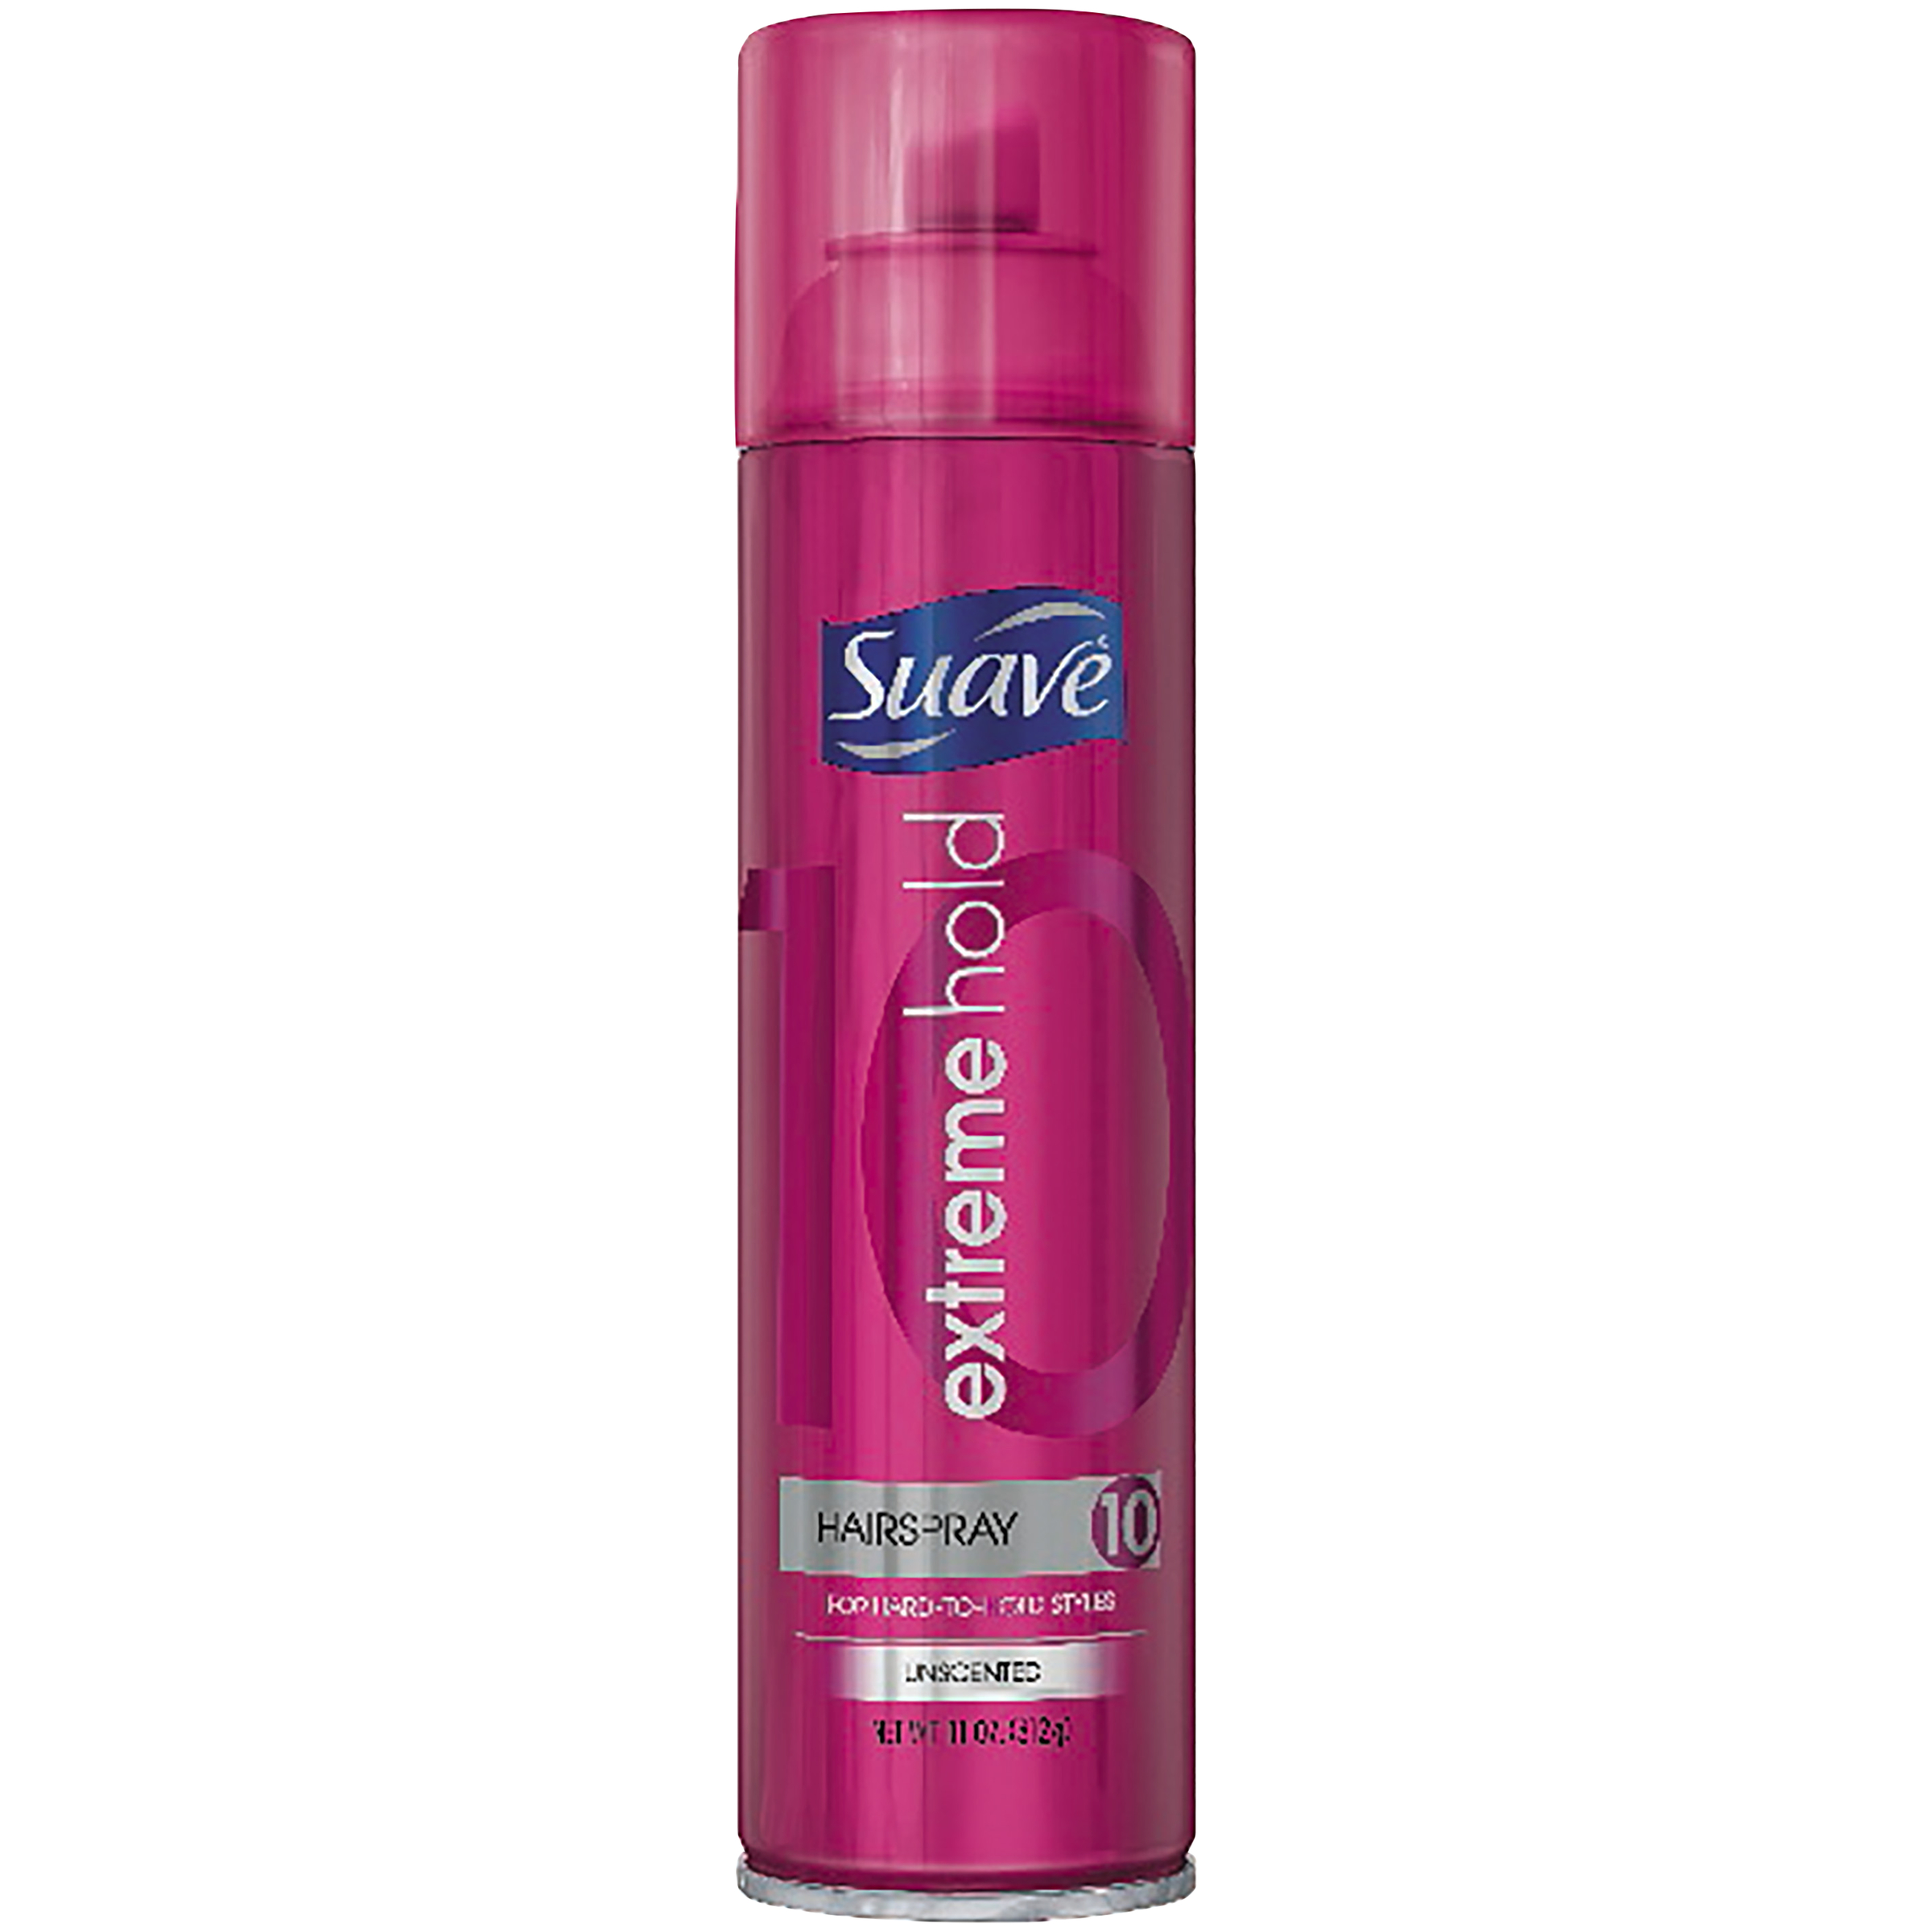 Suave Hairspray, Extreme Hold 10, Unscented, 11 oz (312 g)